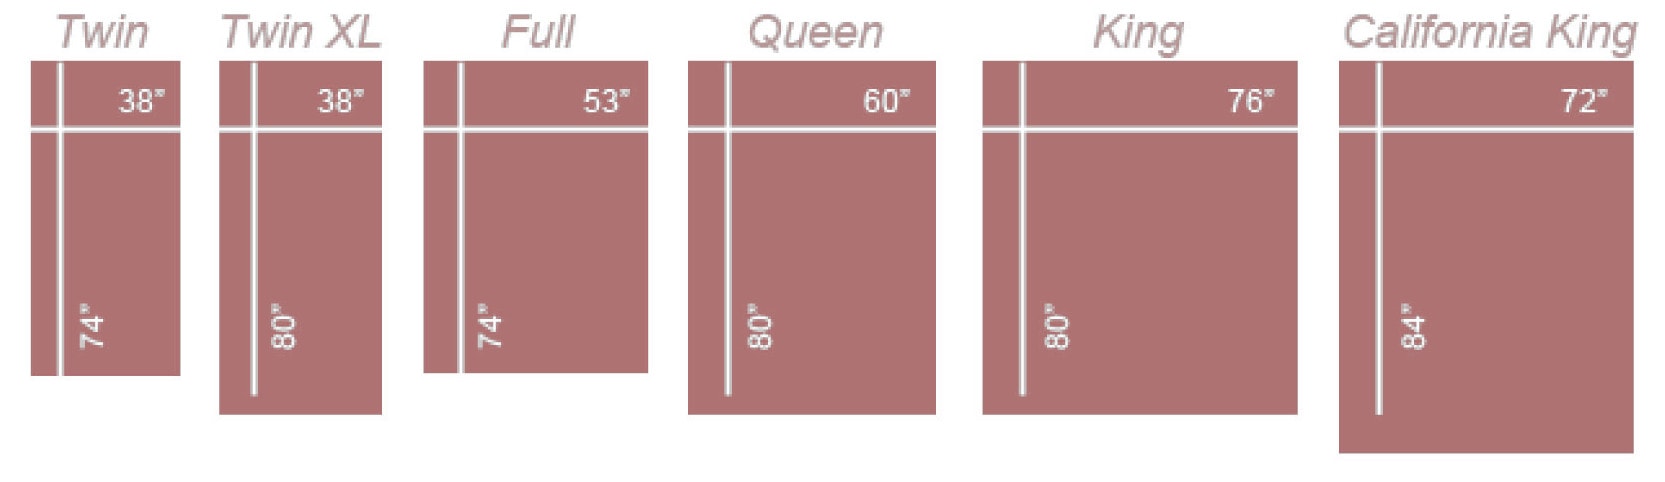 Mattress Sizes Chart Bed Size Guide, King Bed Sizes Chart